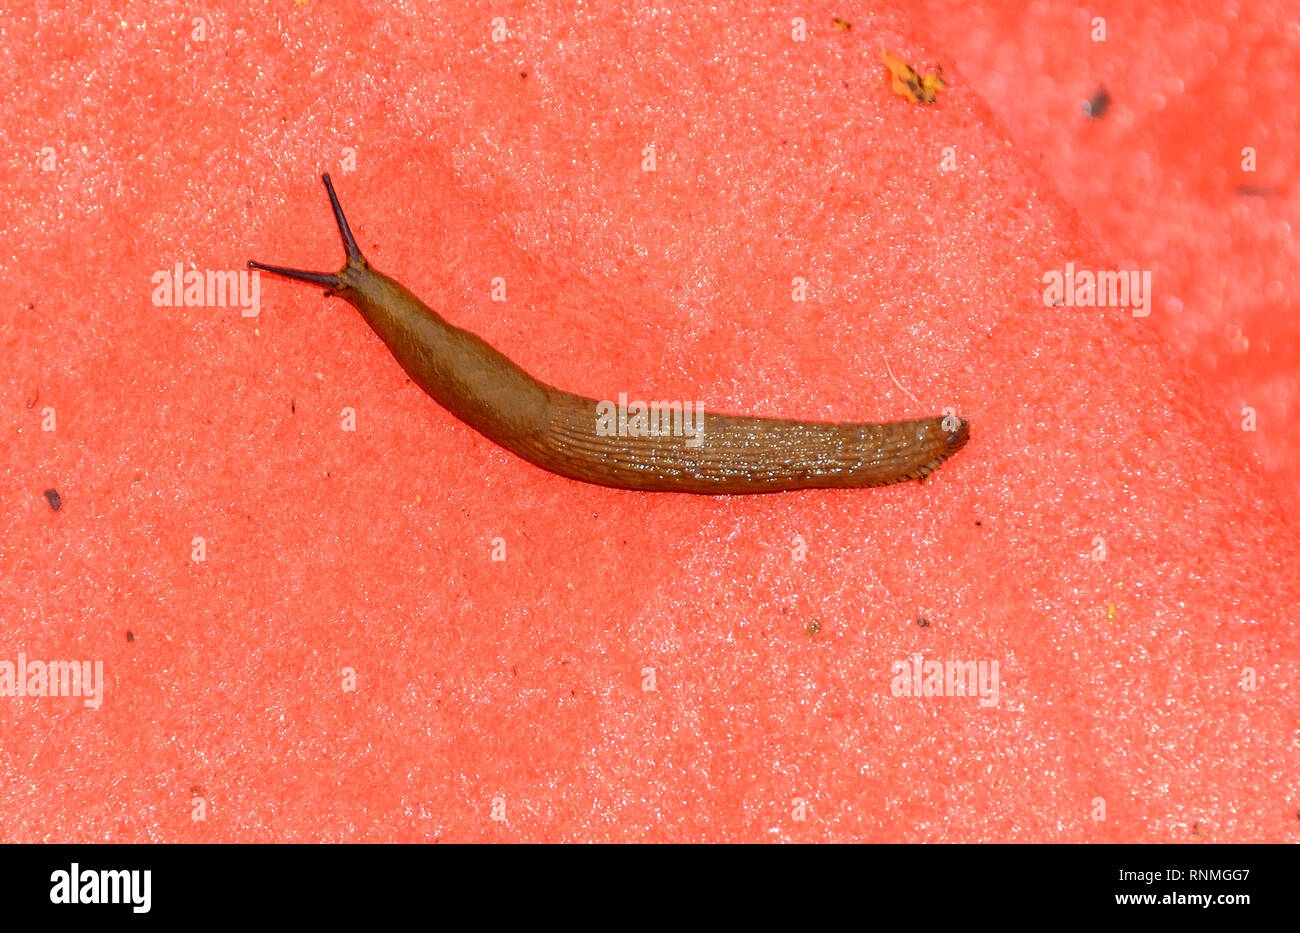 Snail without shell on the ground, open antenas, red background close up. Stock Photo